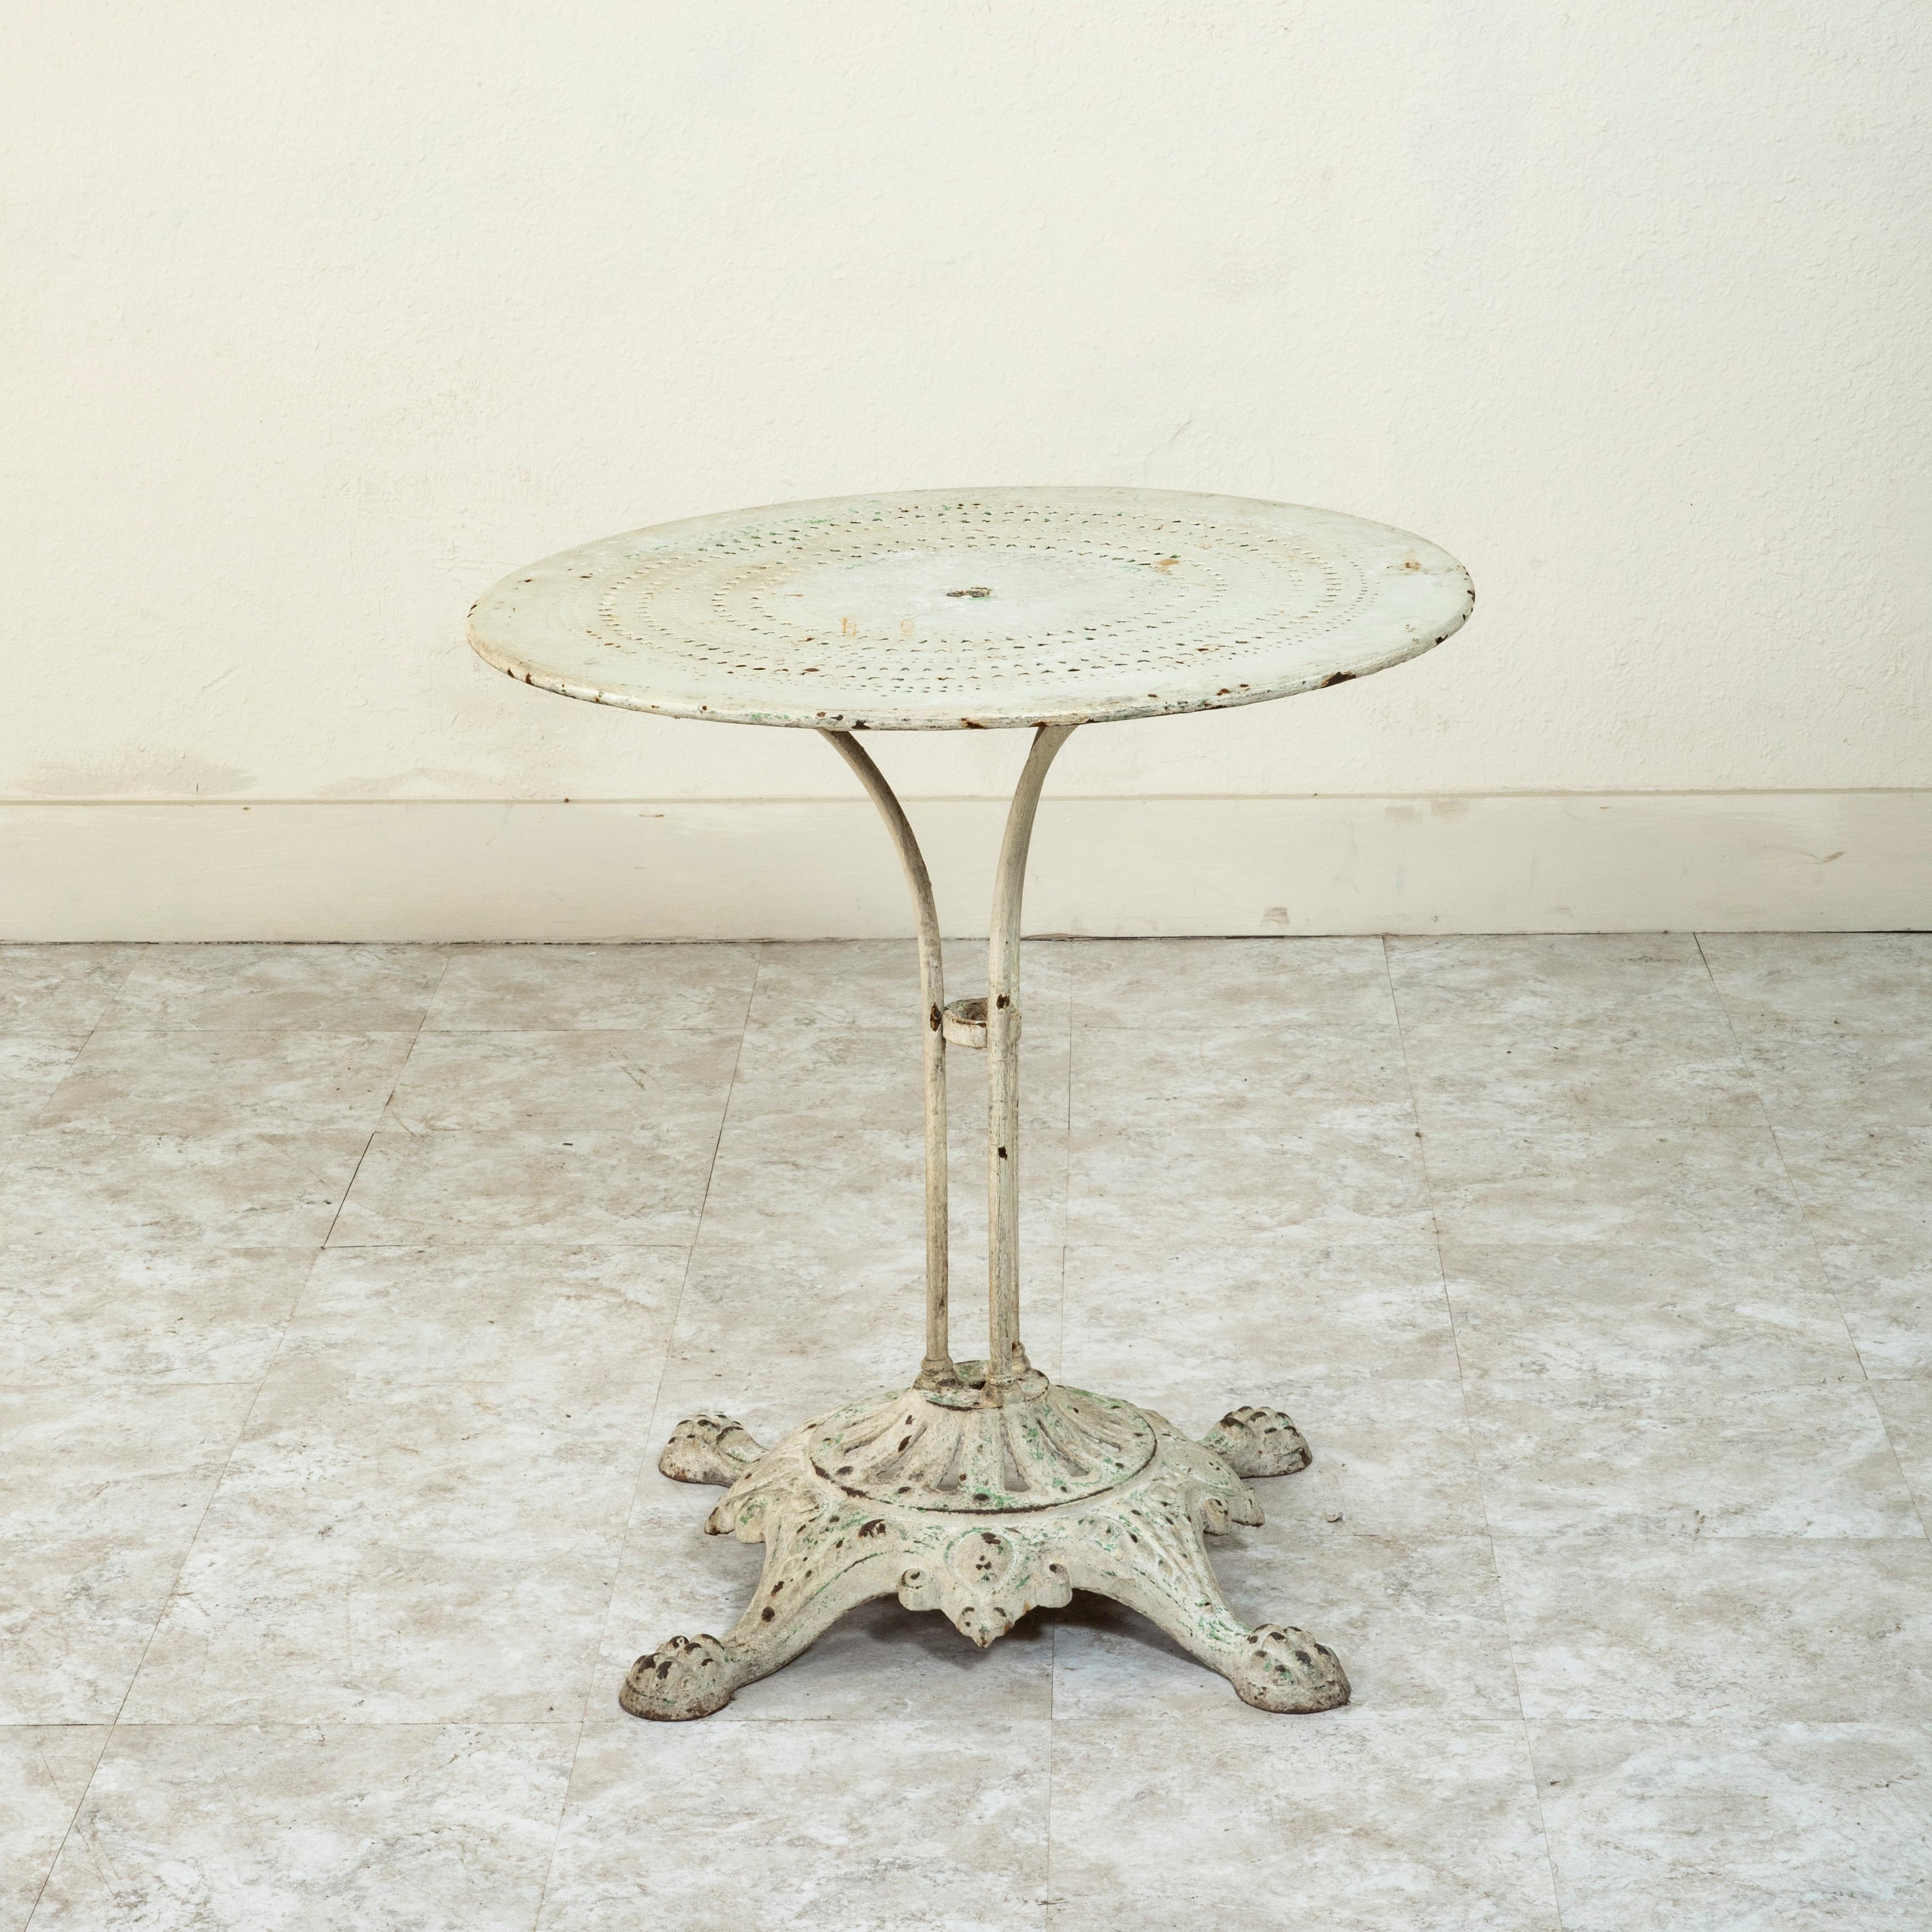 This French iron garden table from the late nineteenth century features a pierced metal top with a hole in the middle for an umbrella on a cast iron base. The top is supported by four iron rods mounted on an iron pedestal base. The pierced cast iron